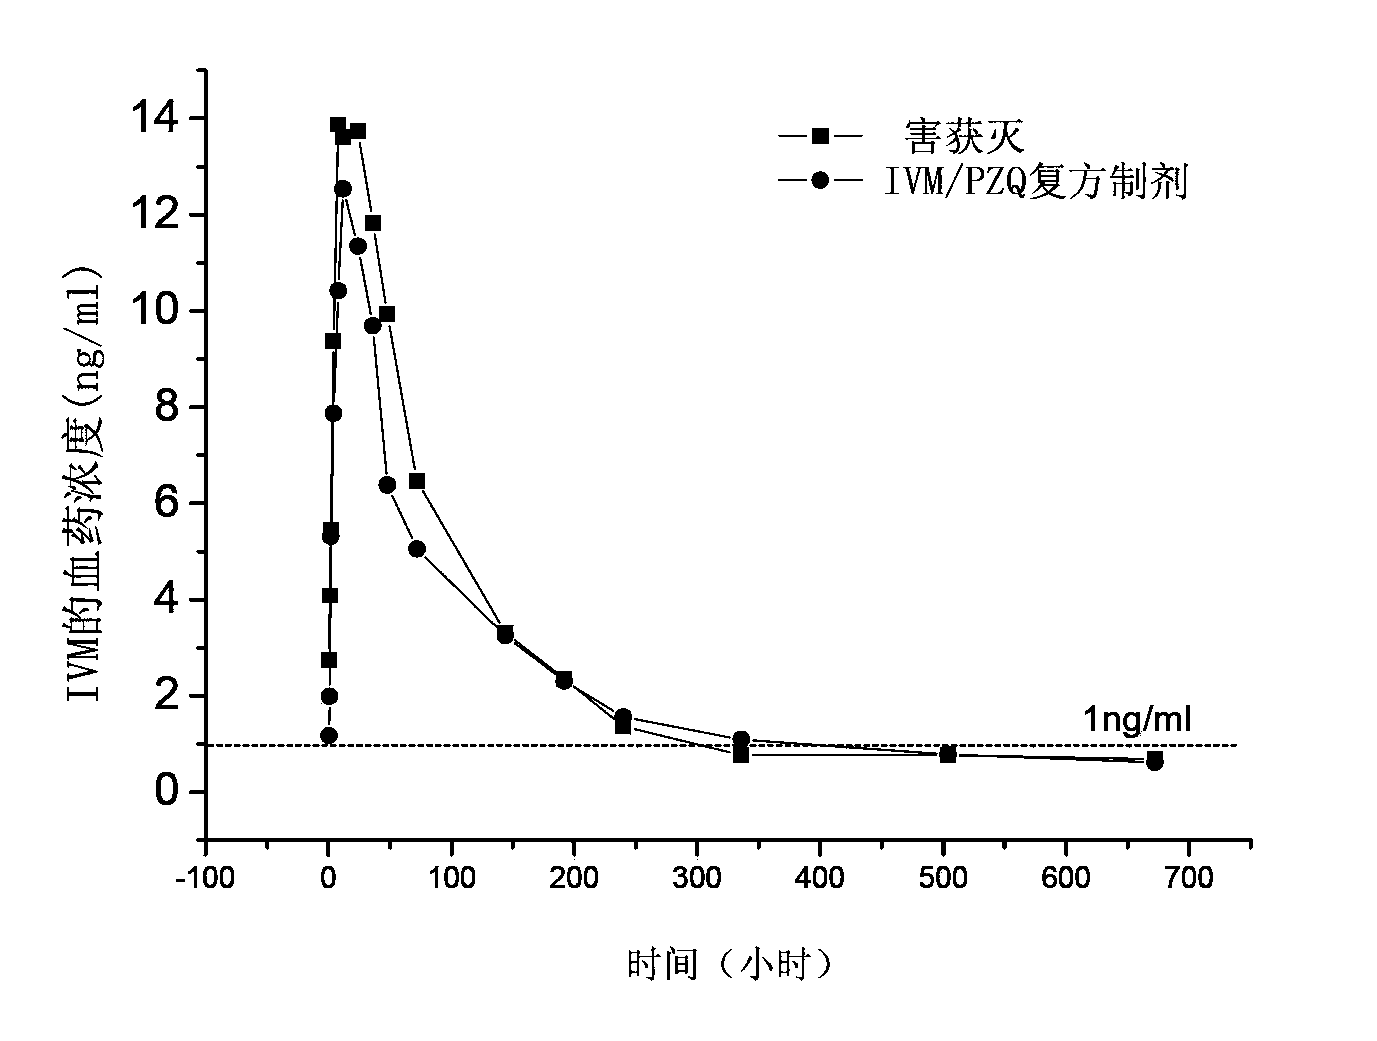 Veterinary compound suspension injection containing ivermectin and praziquantel and preparation method thereof